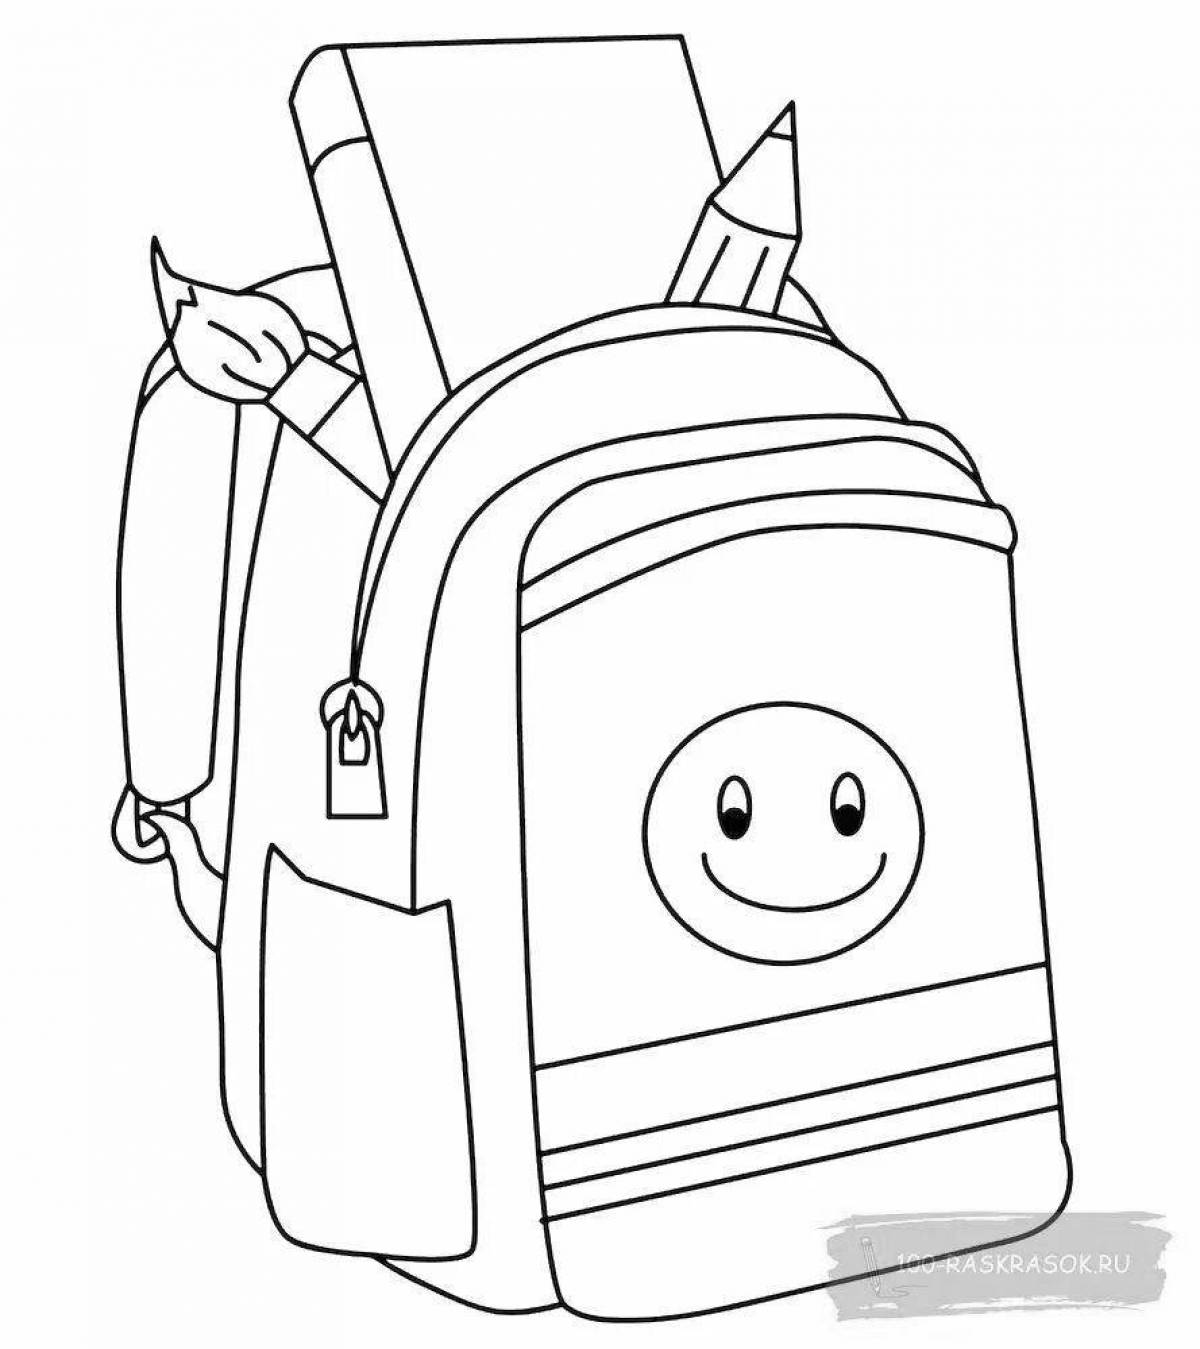 Coloring page unusual backpack